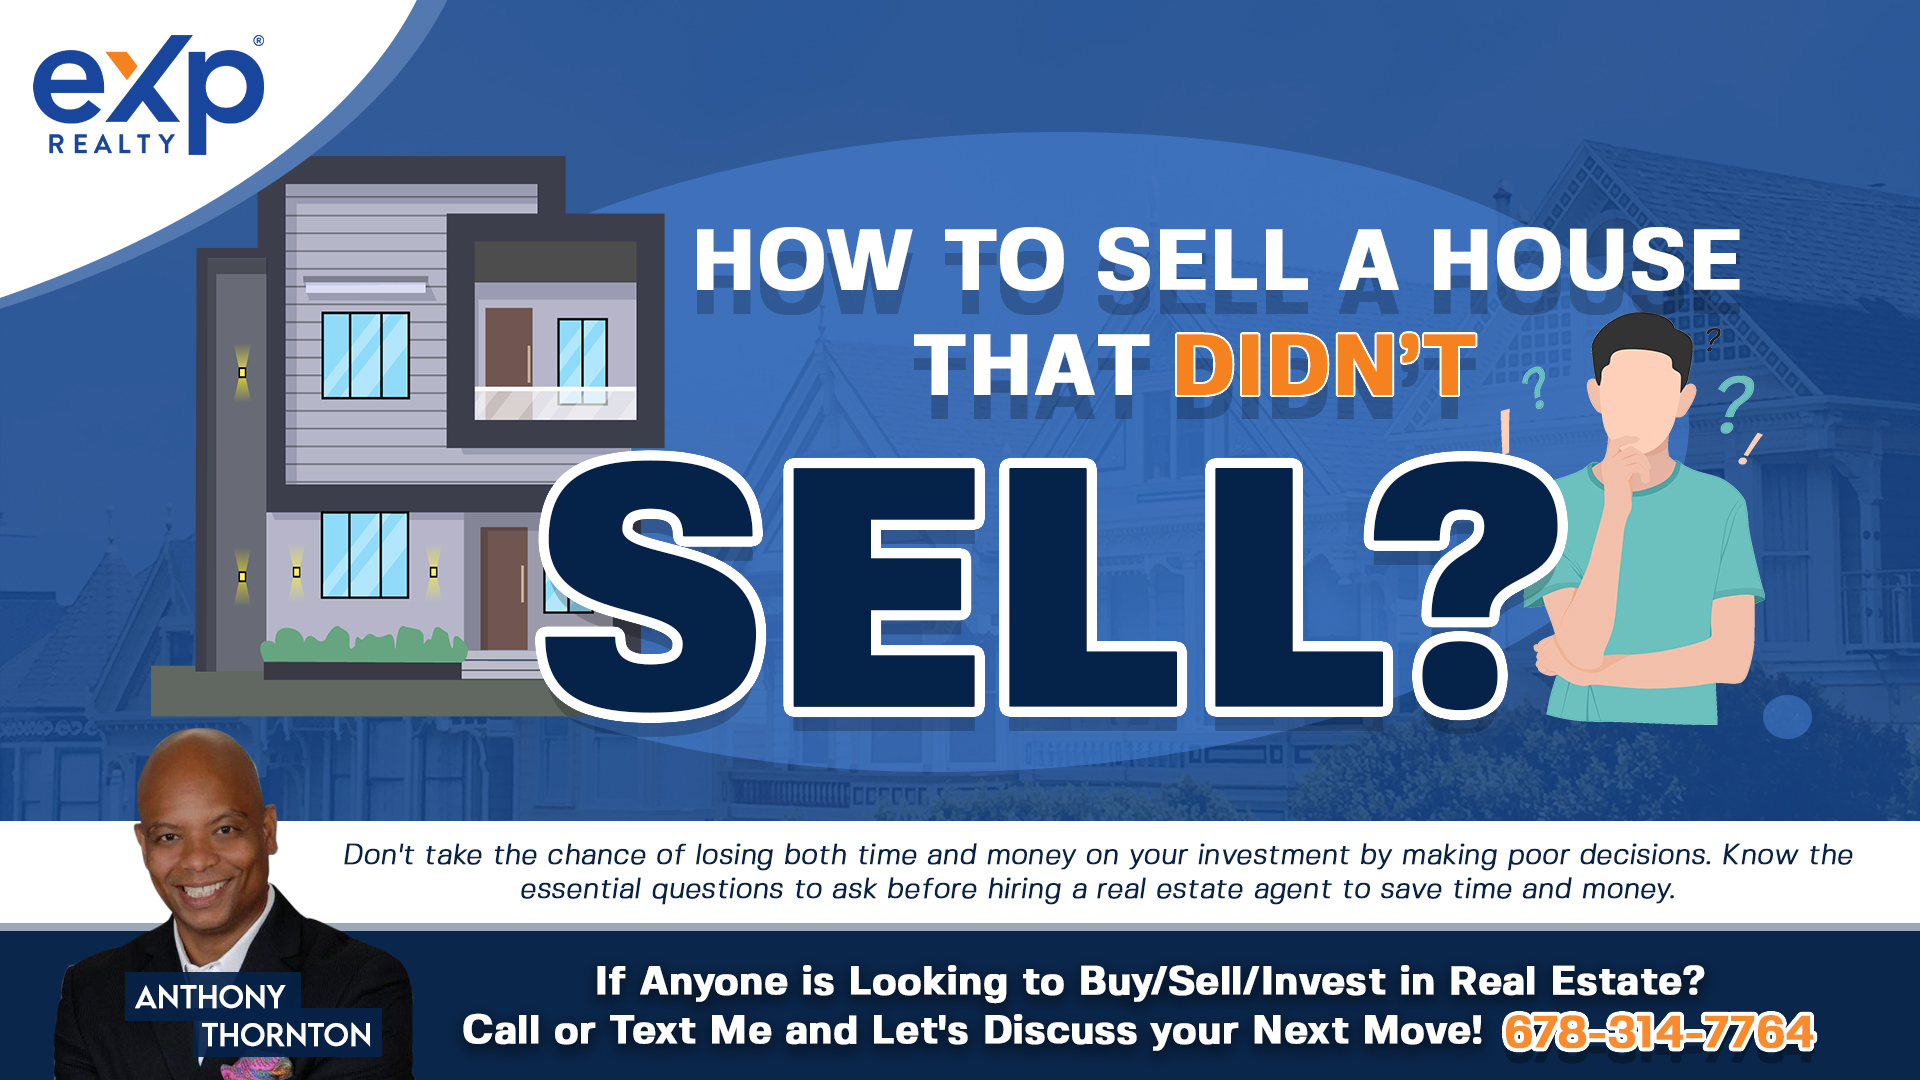 How to sell house didnt sell.jpg